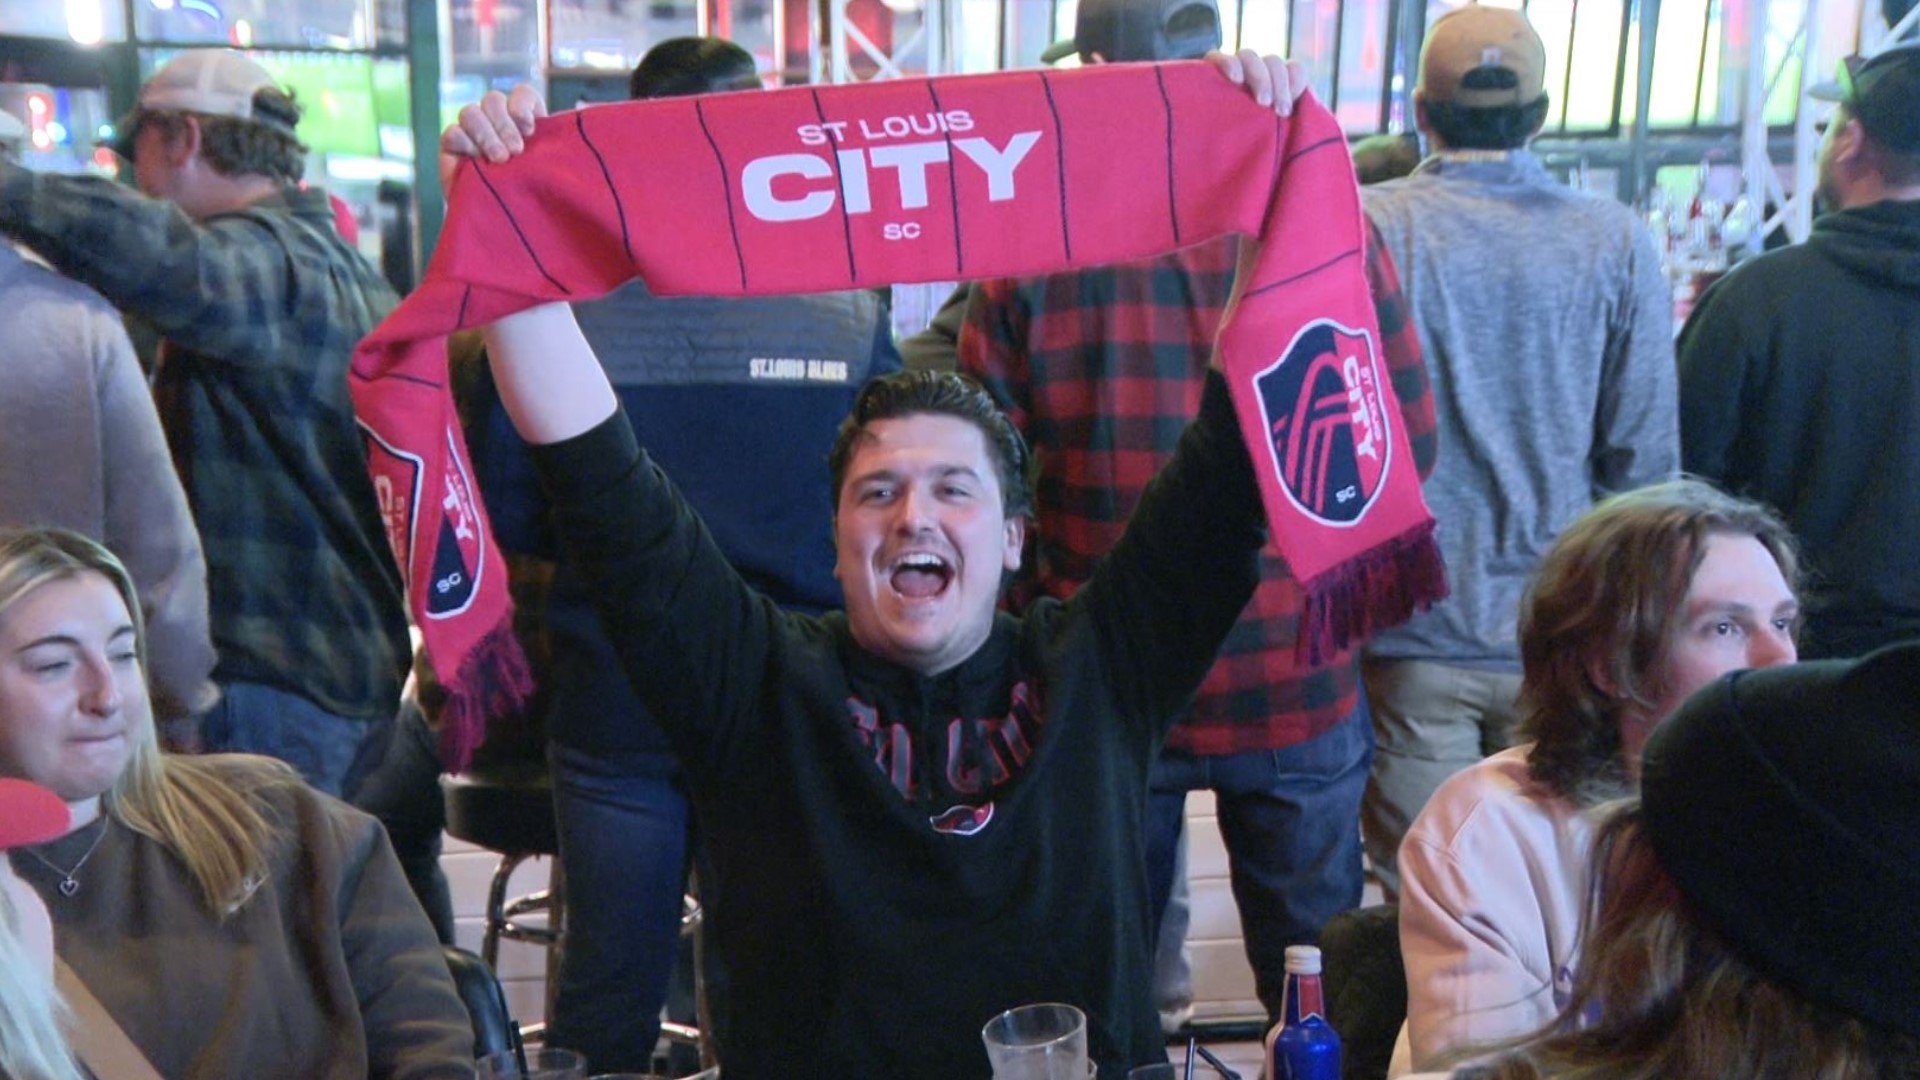 If you don't have tickets to the inaugural St. Louis CITY SC home match, you can still join the festivities. Several events will take place throughout the city.